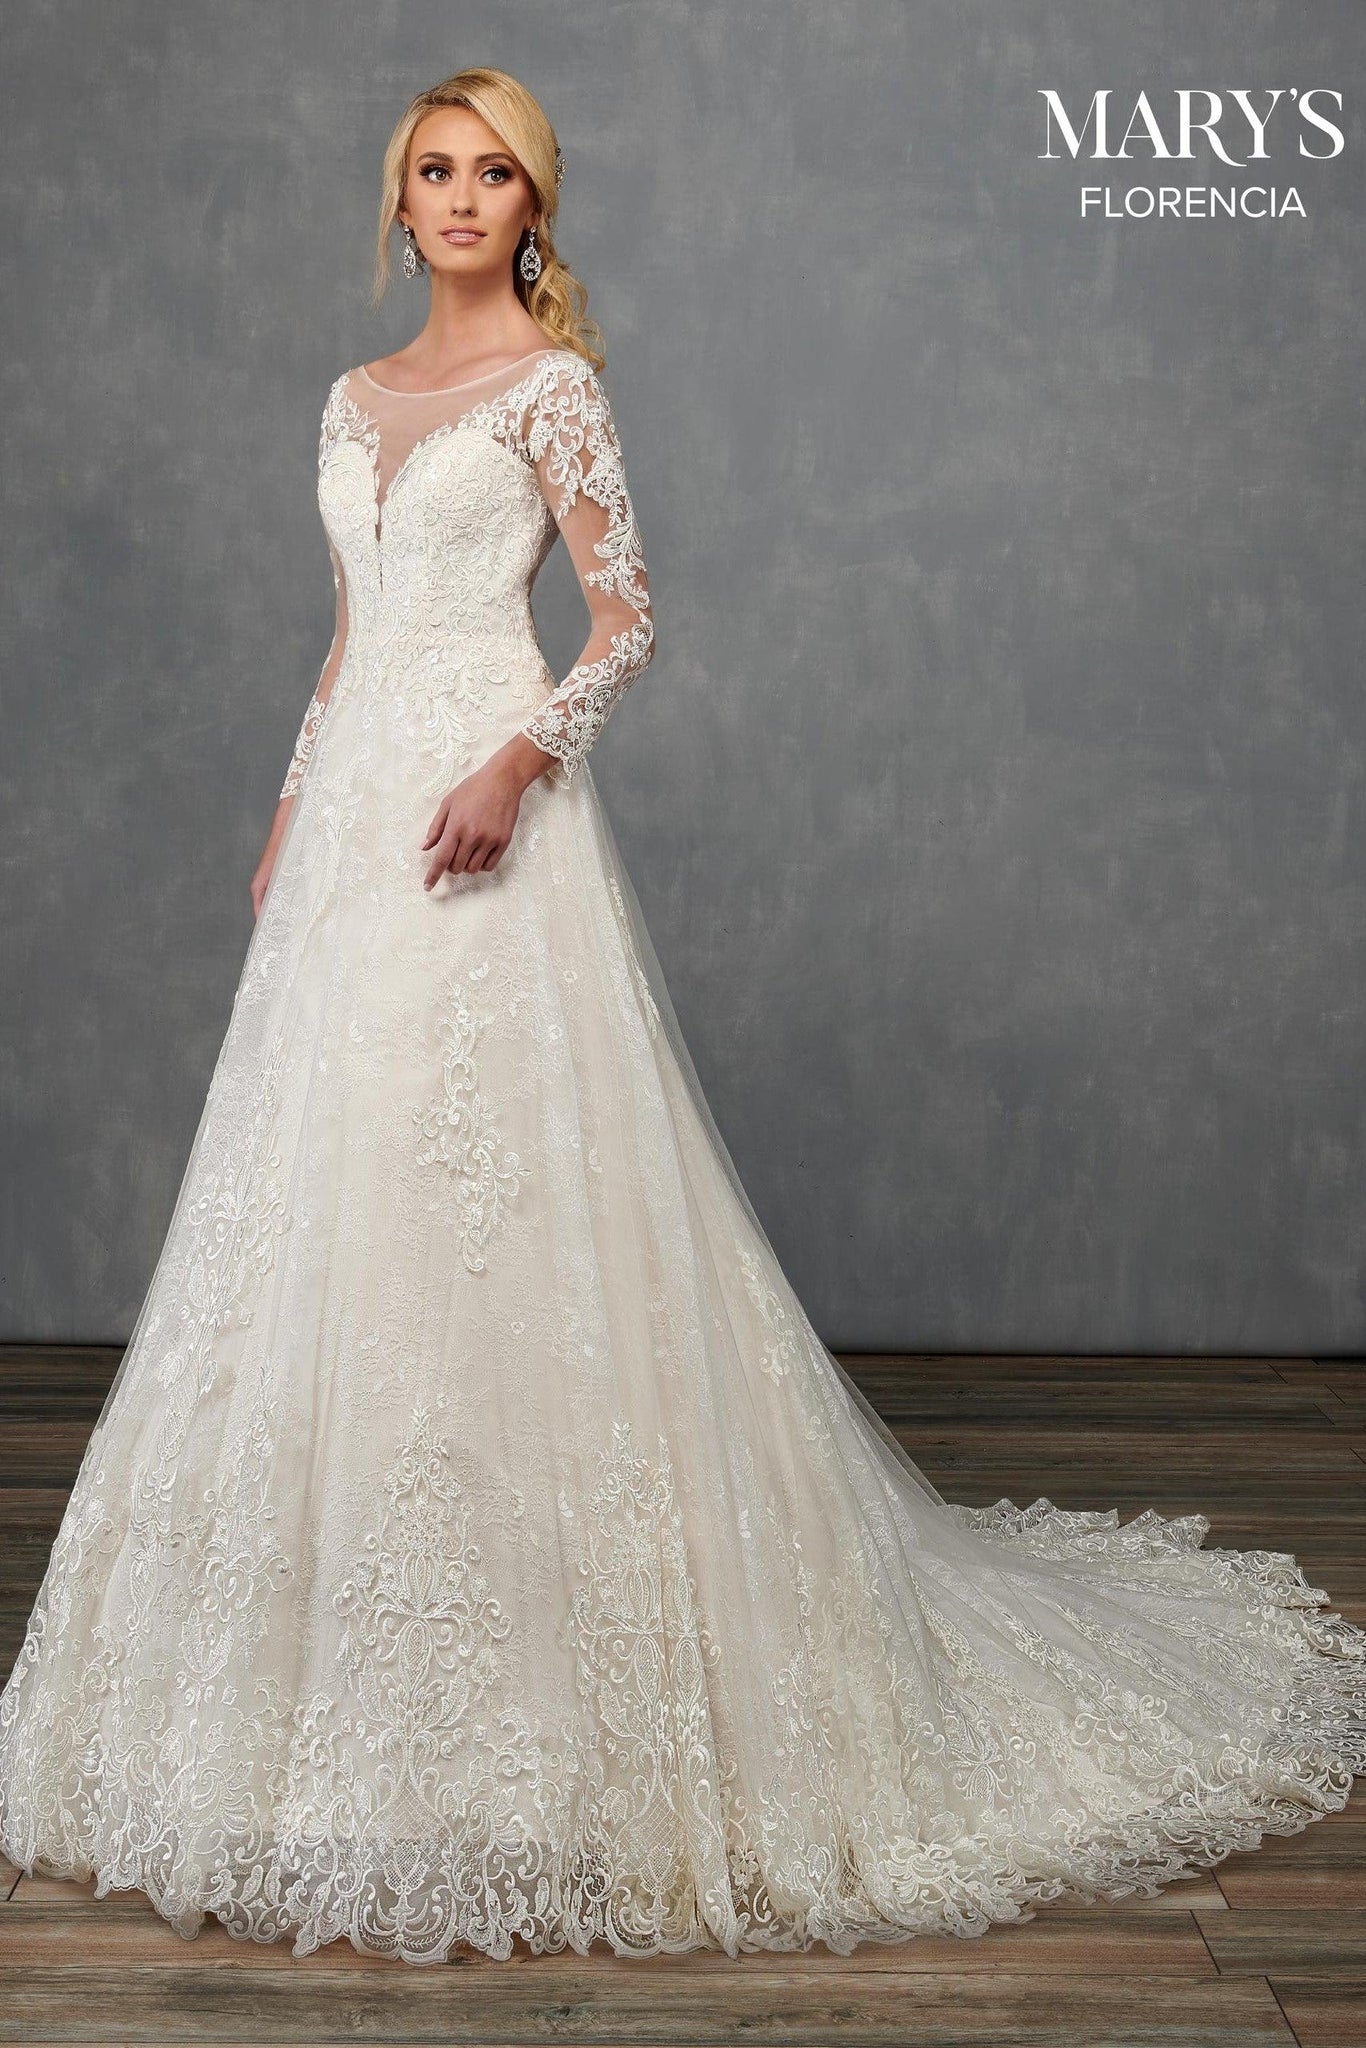 MARY'S BRIDAL - Hannah - Adore Bridal and Occasion Wear